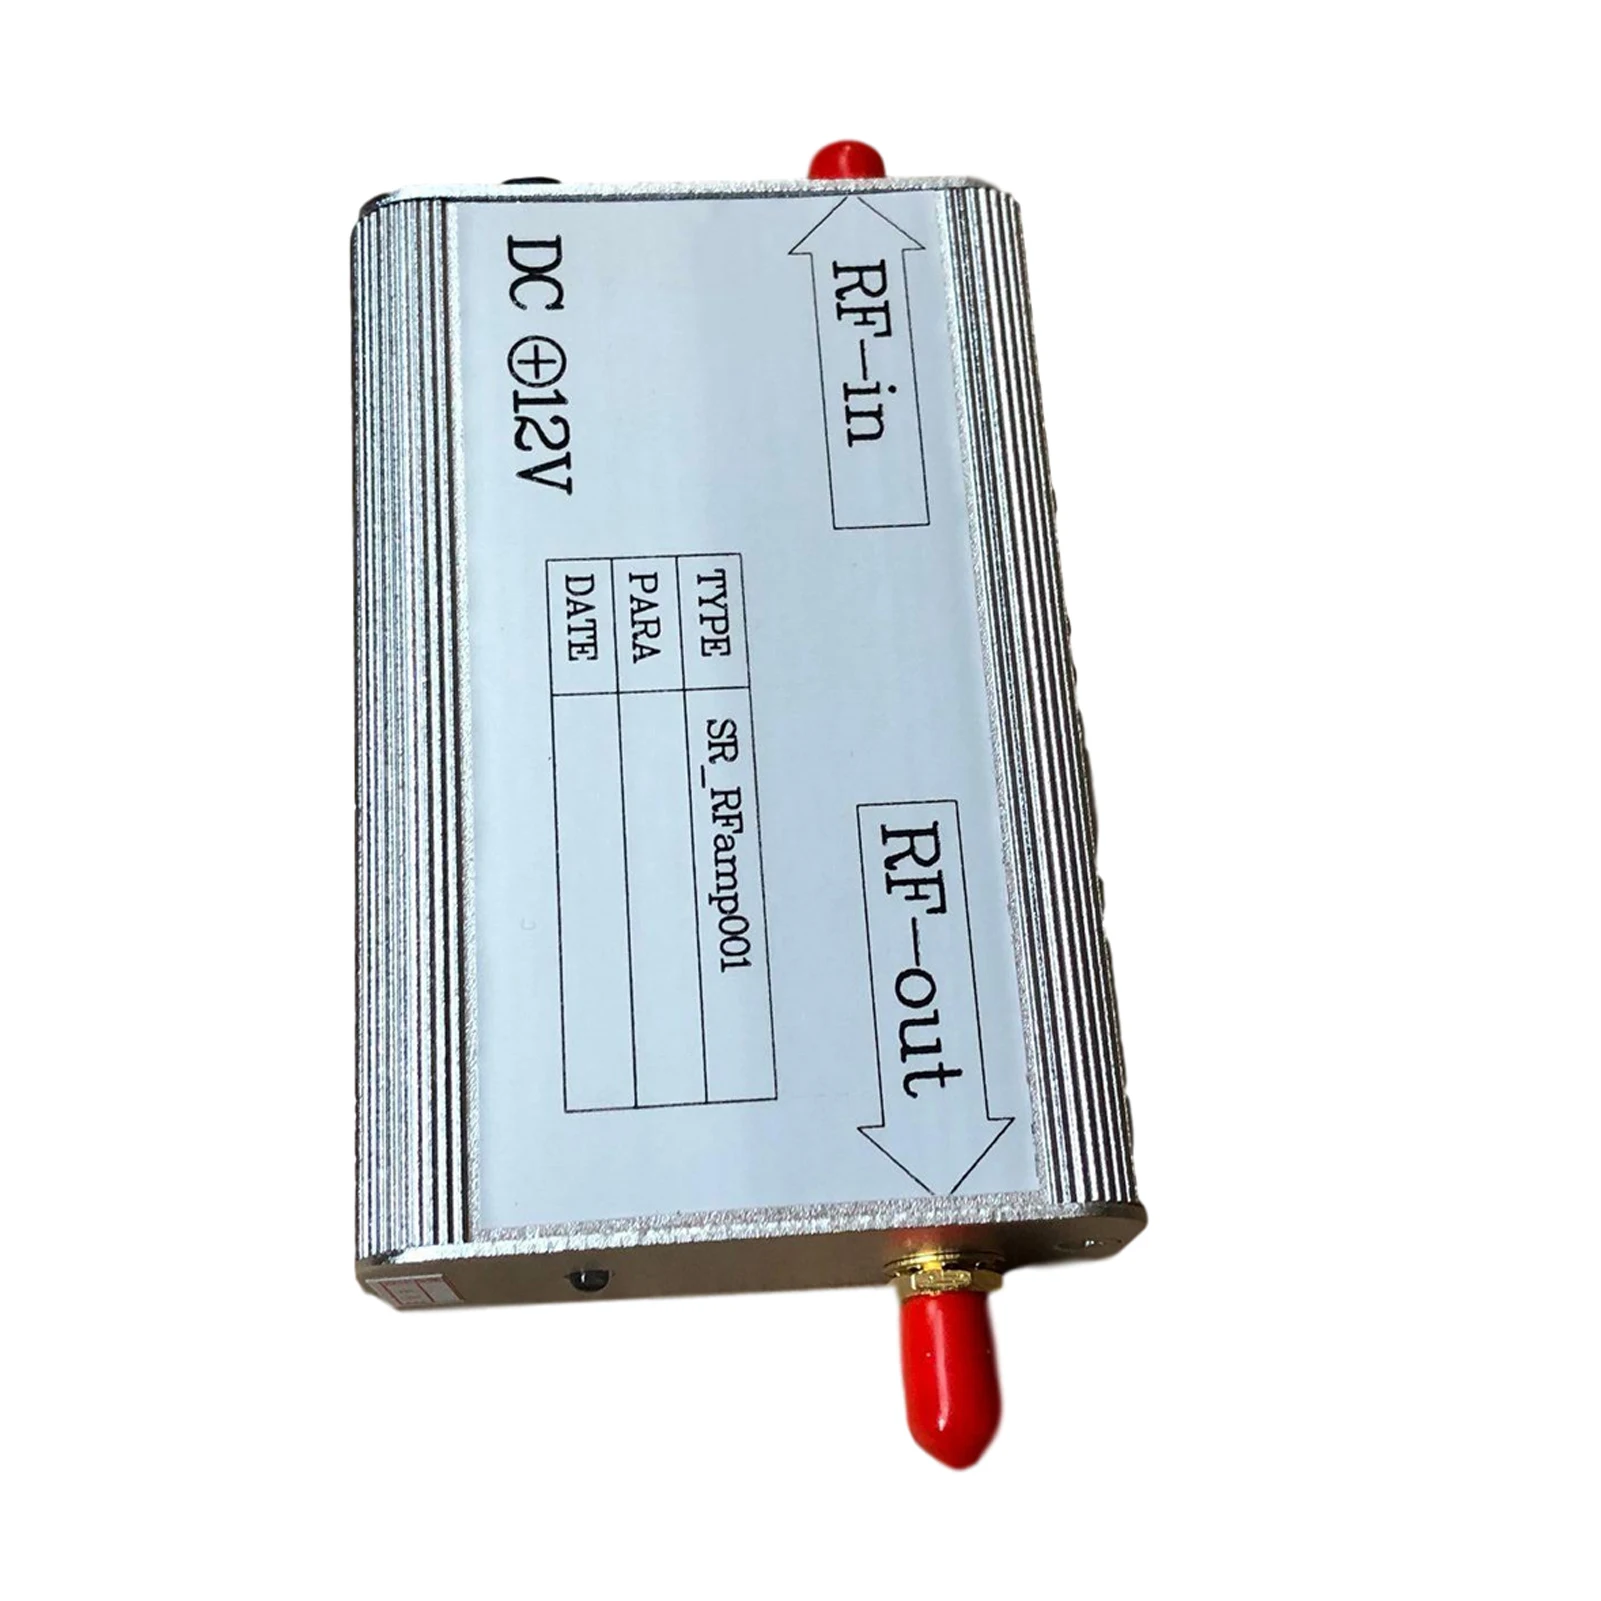 

8KHz-3GHz Frequency Band MC EMI Low Noise RF Radio Frequency Amplifier 30dB Input Signal RFamp001 Practical Professional Tools